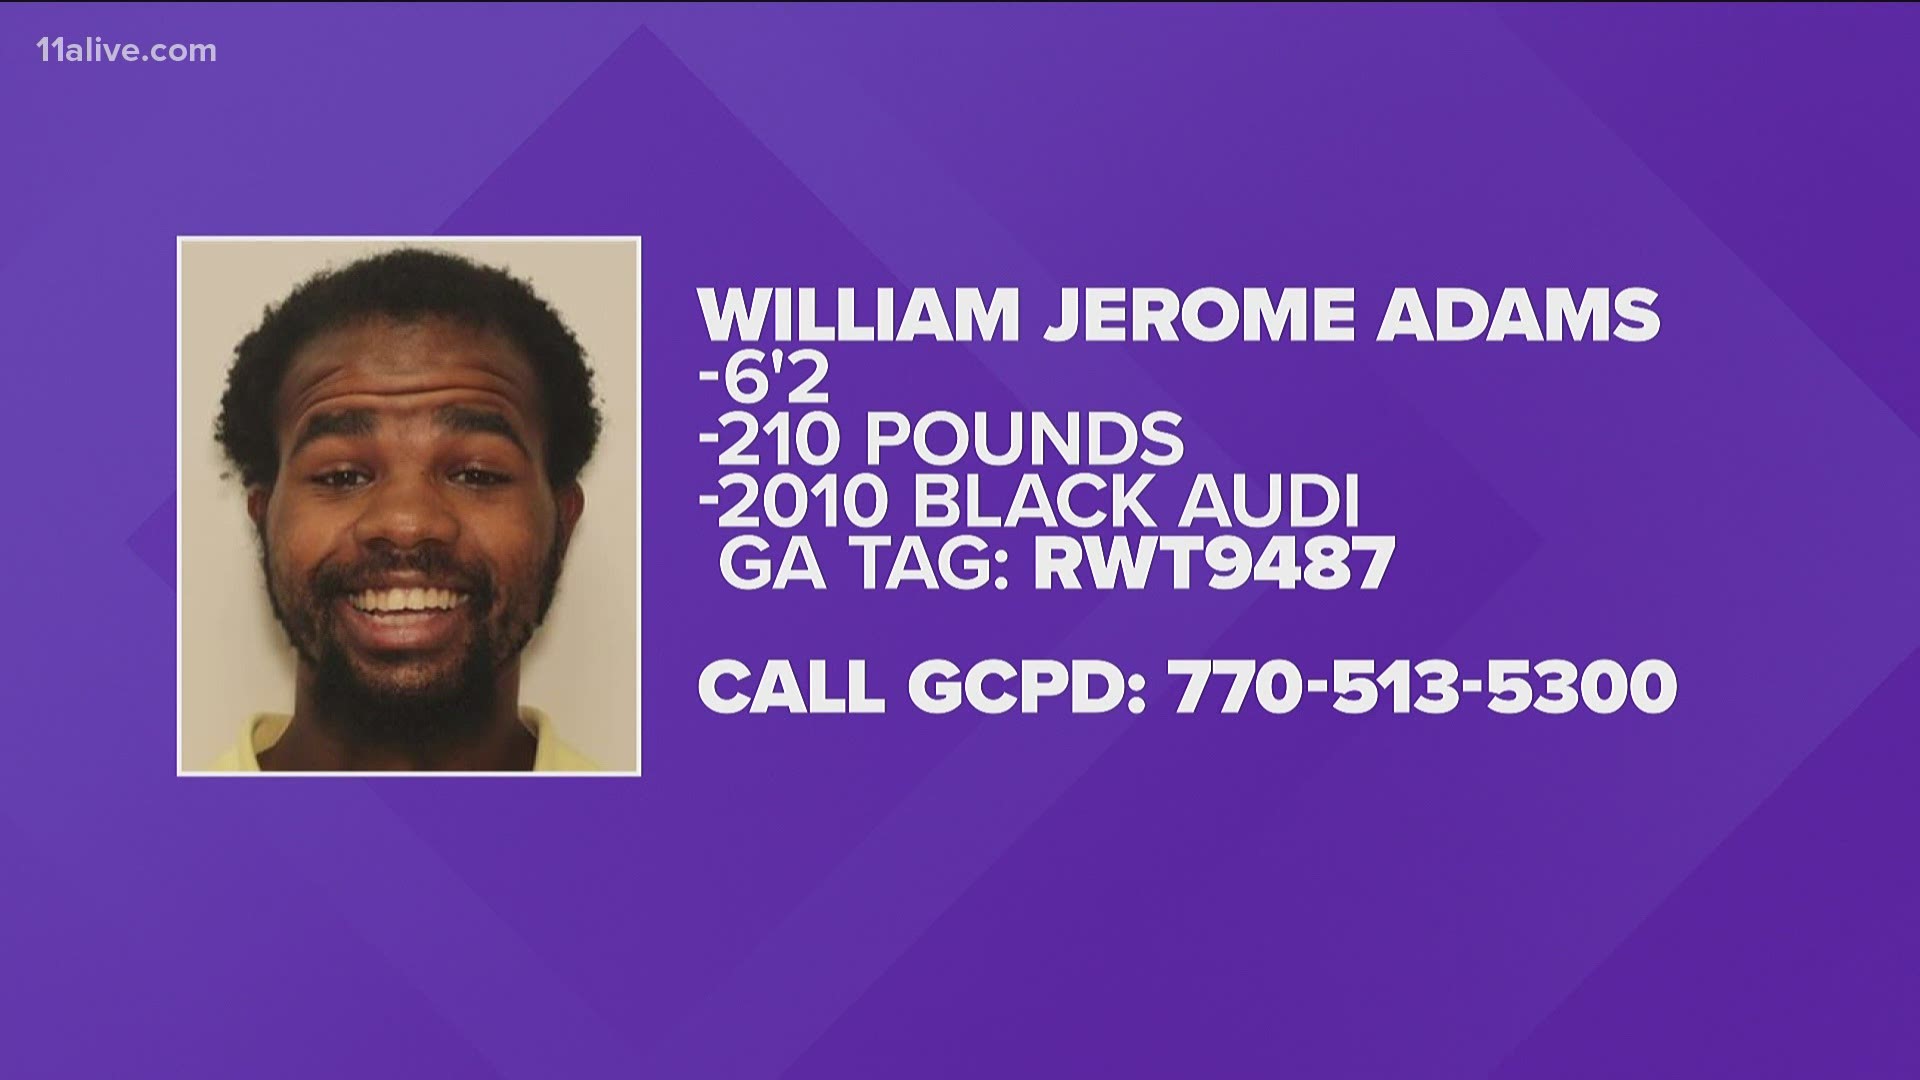 Officers are searching for 24-year-old William Jerome Adams in connection with the crime, they said.